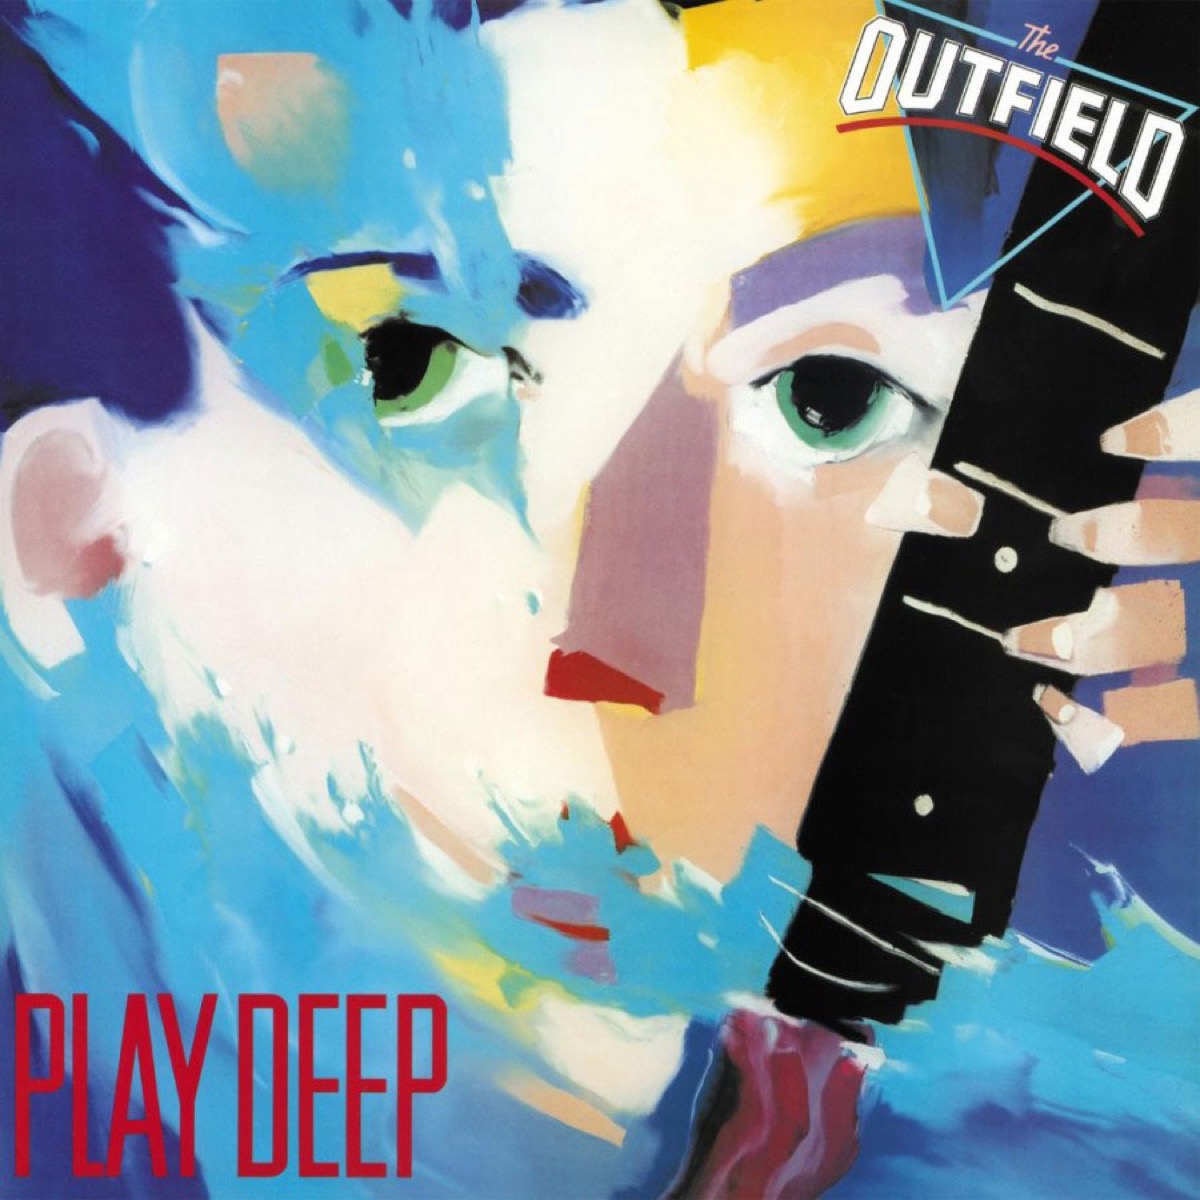 album cover of play deep by the outfield